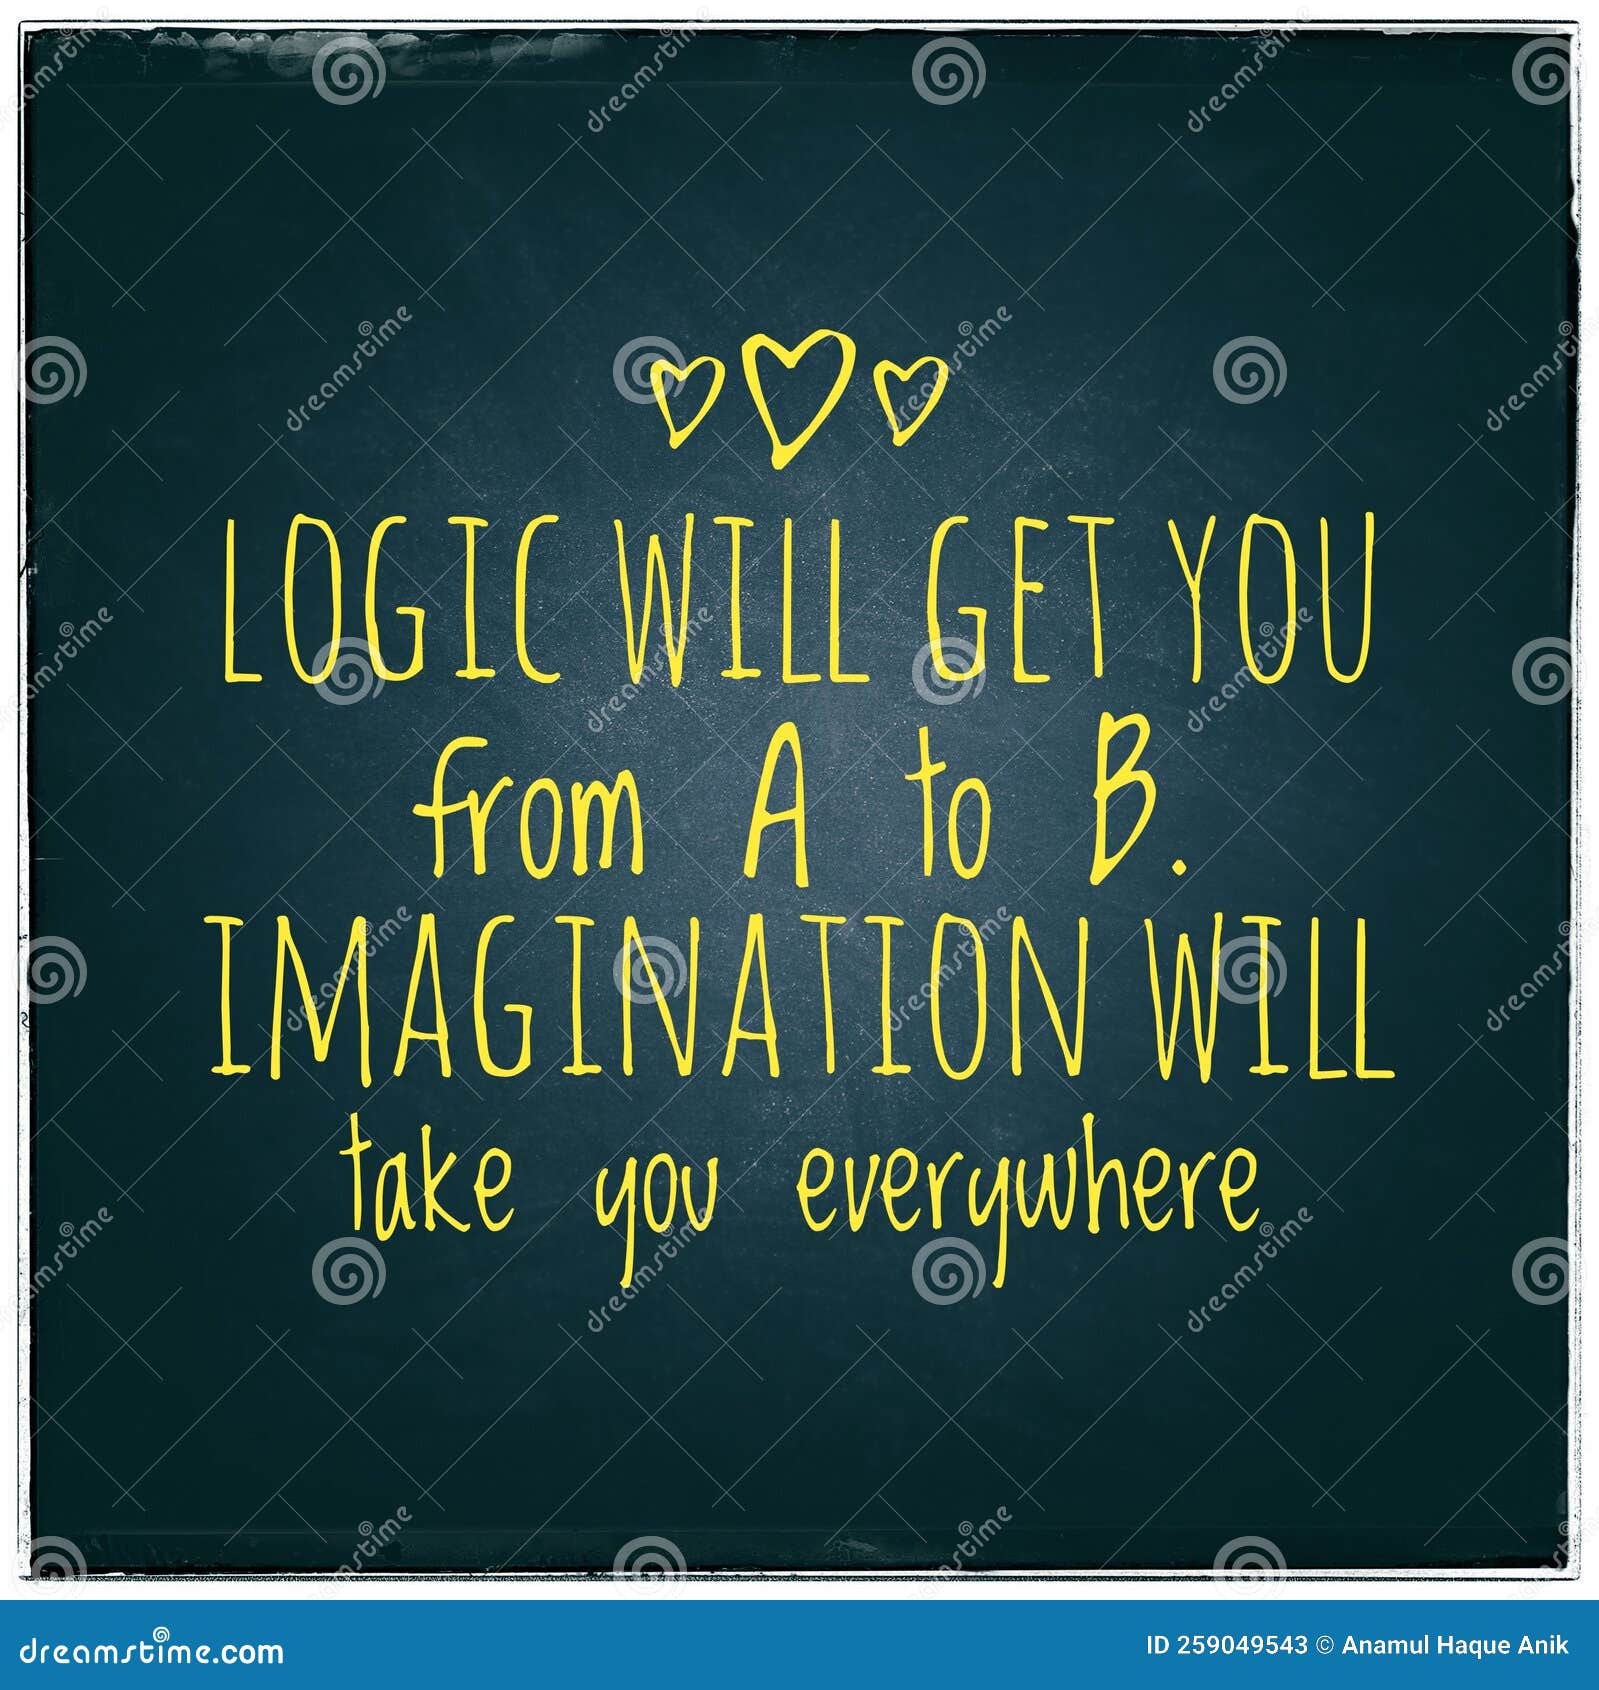 Logic will get you from A to B. Imagination will take you